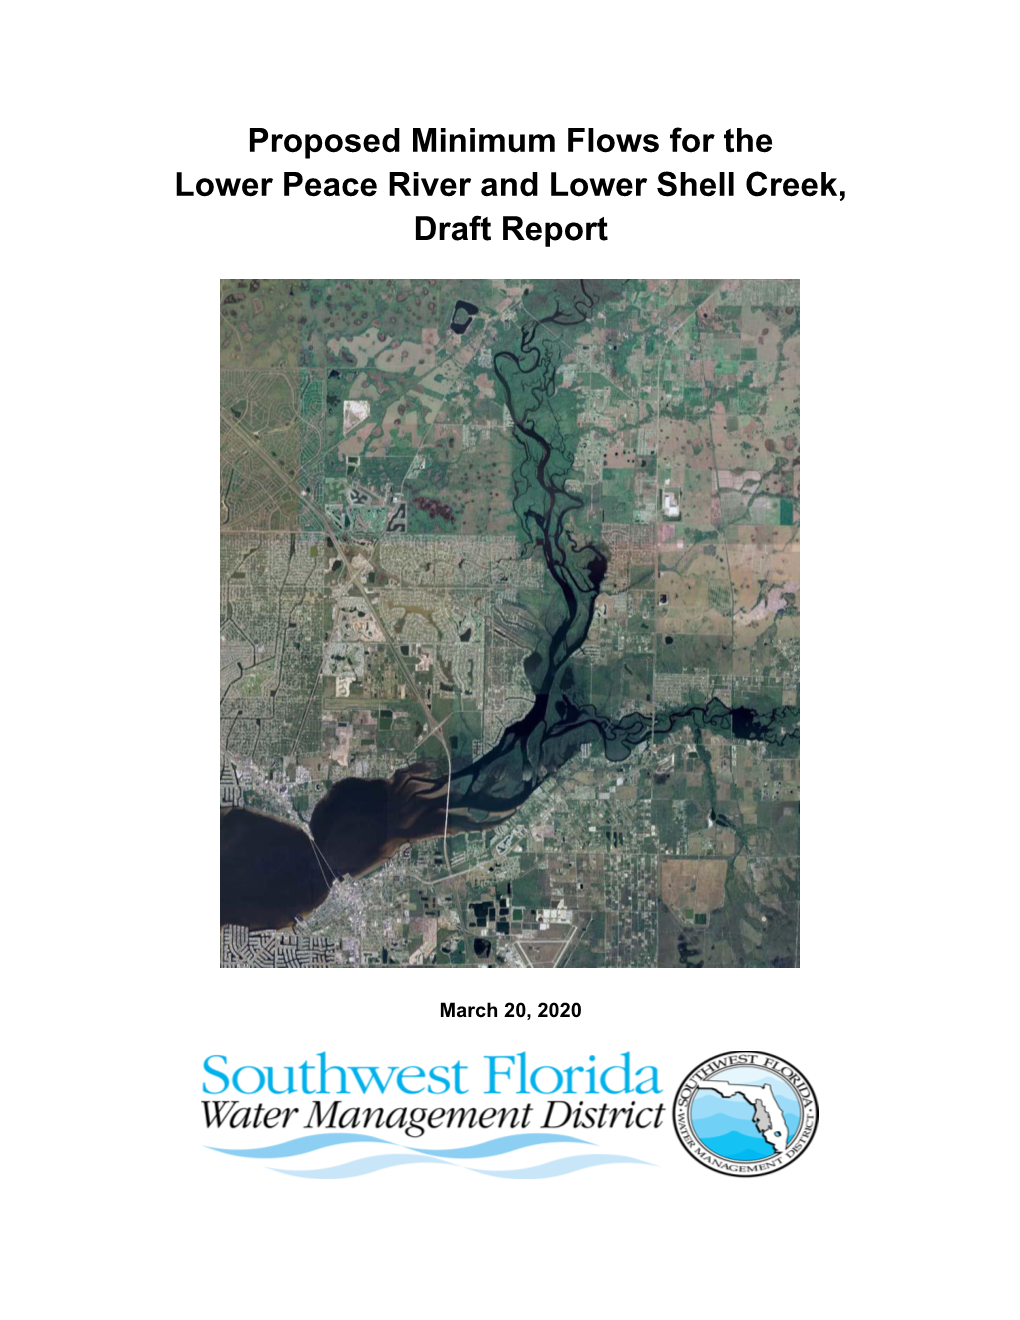 Proposed Minimum Flows for the Lower Peace River and Lower Shell Creek, Draft Report